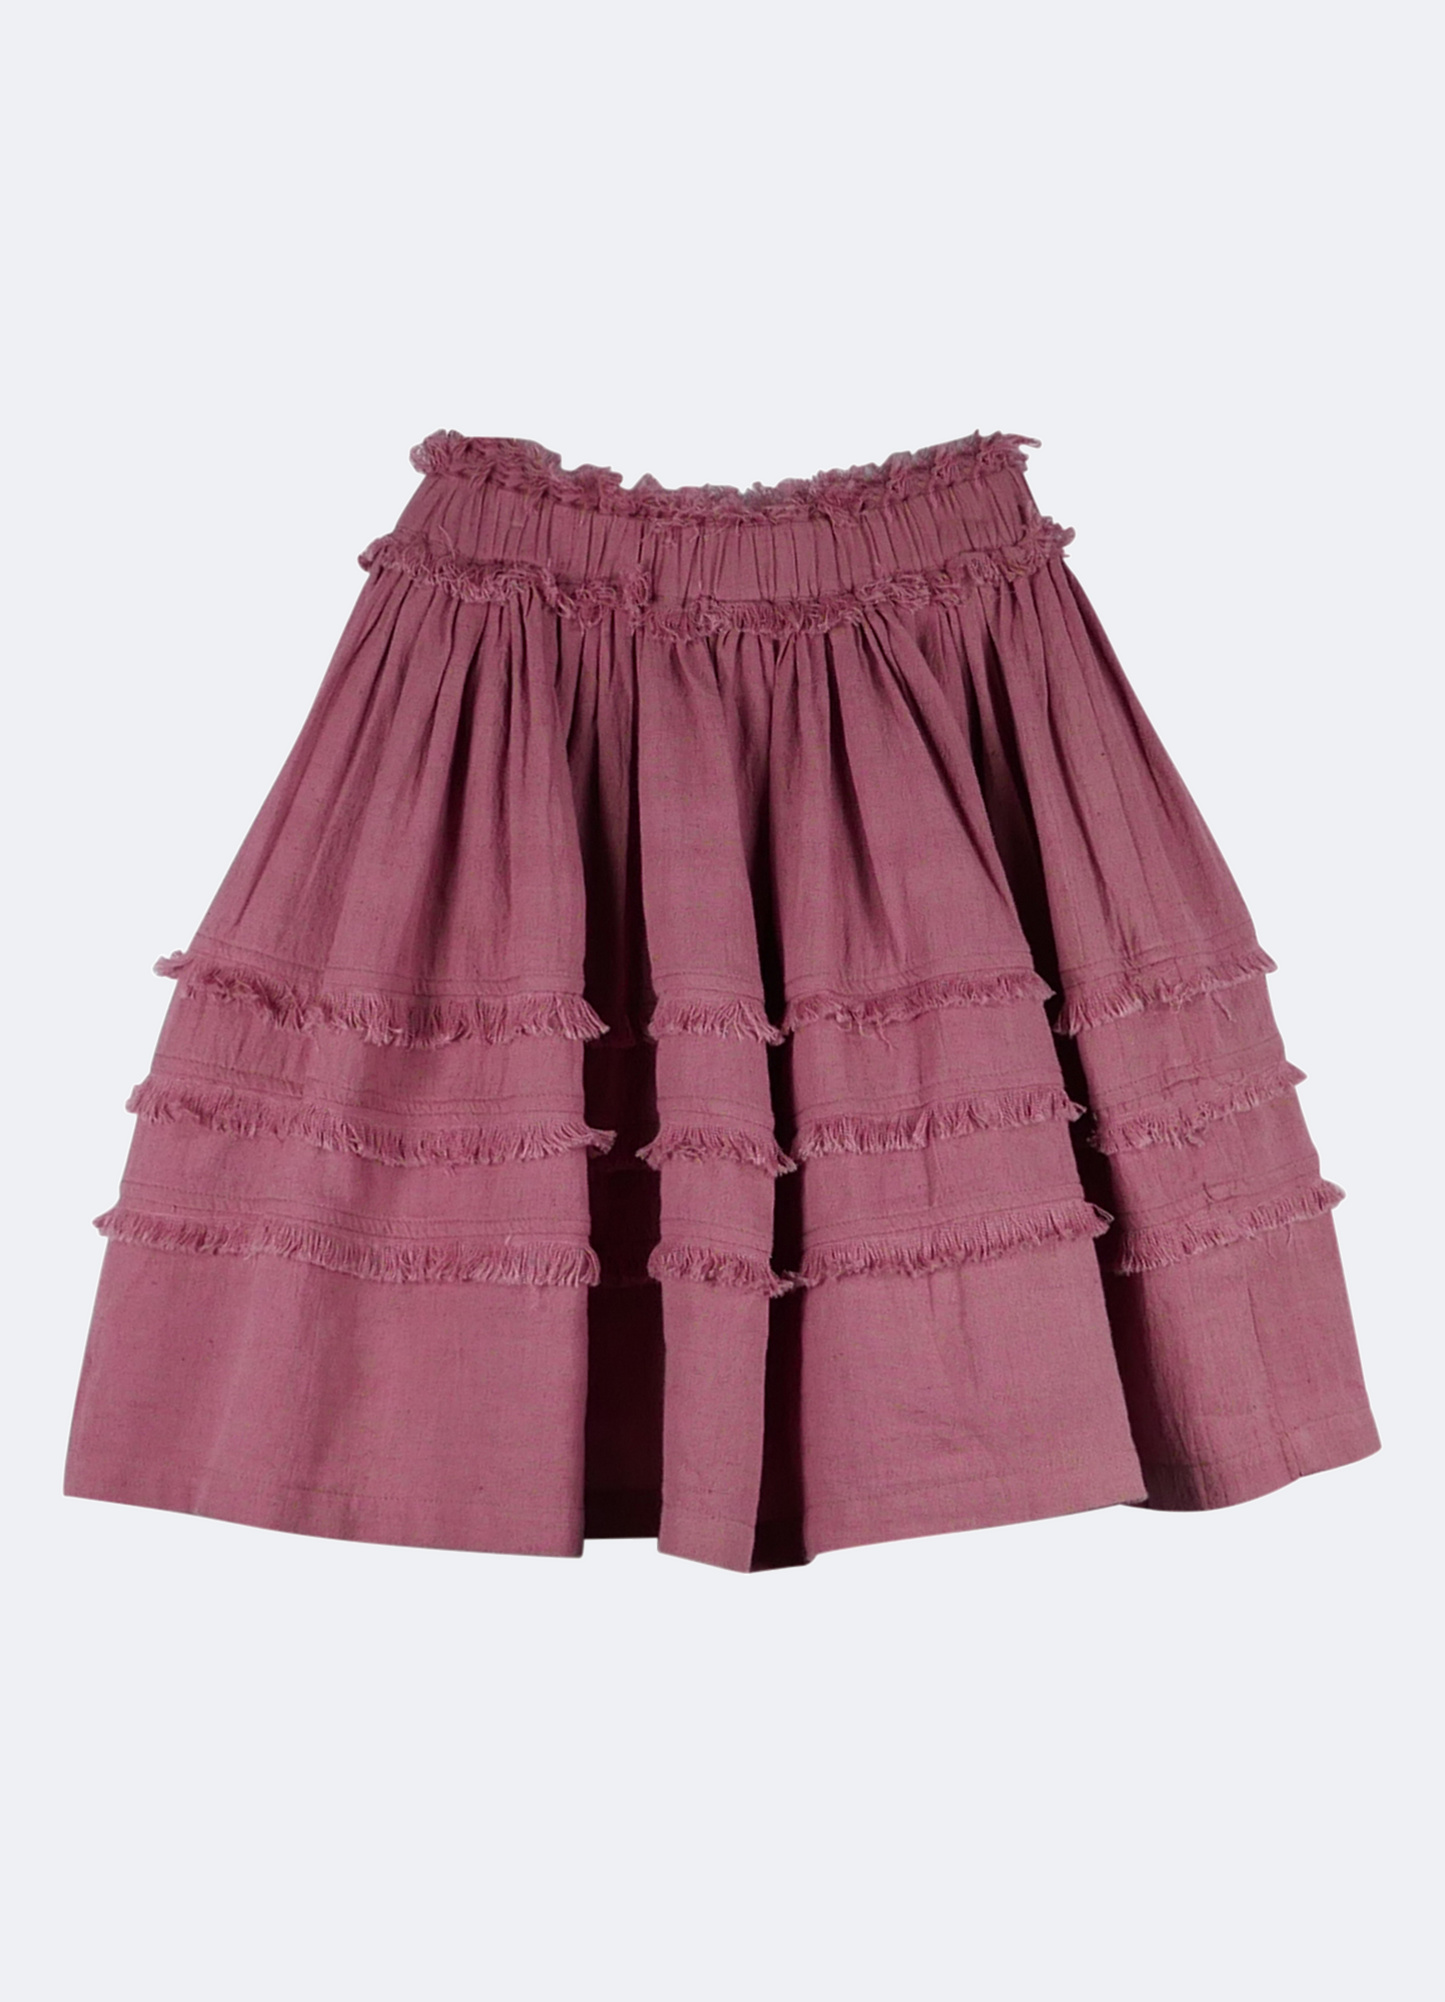 Skirt Nr. 20 - Withered Rose